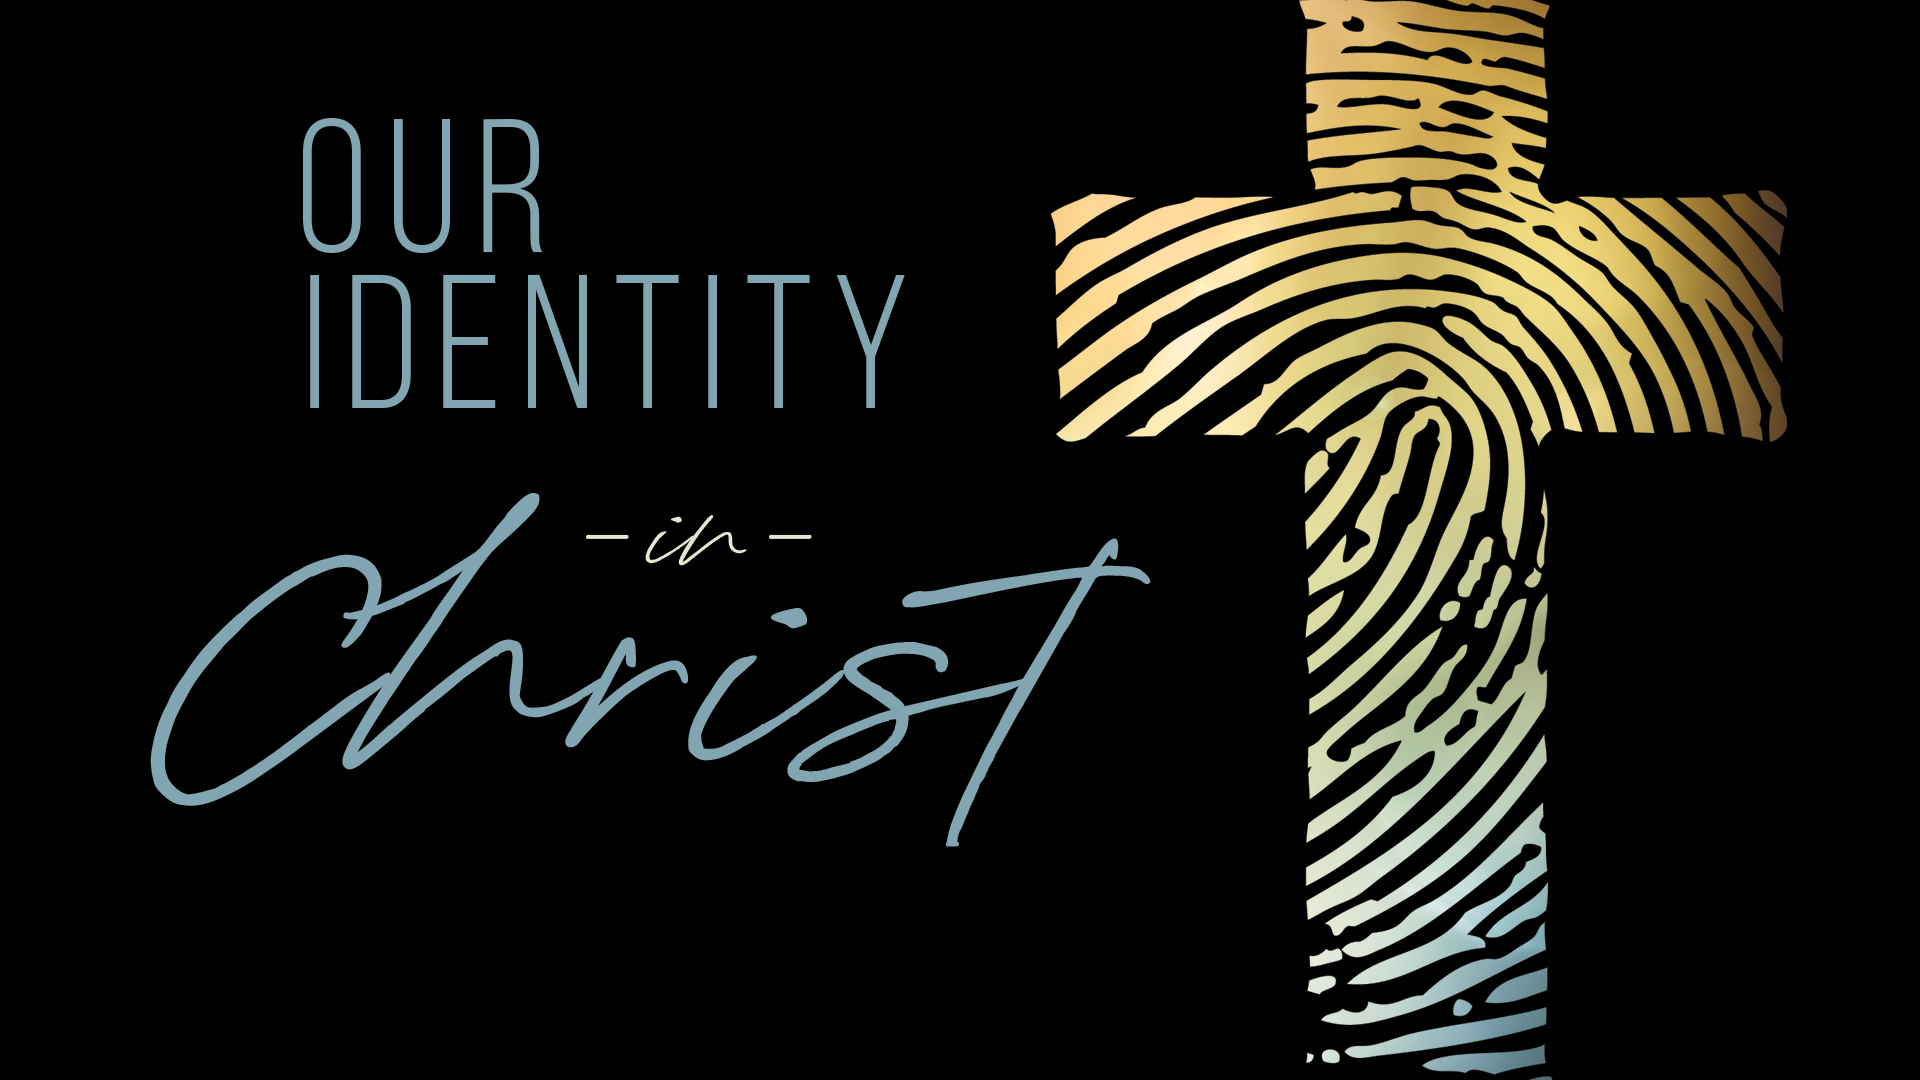 Our Identity in Christ:  We are Missionaries of Love